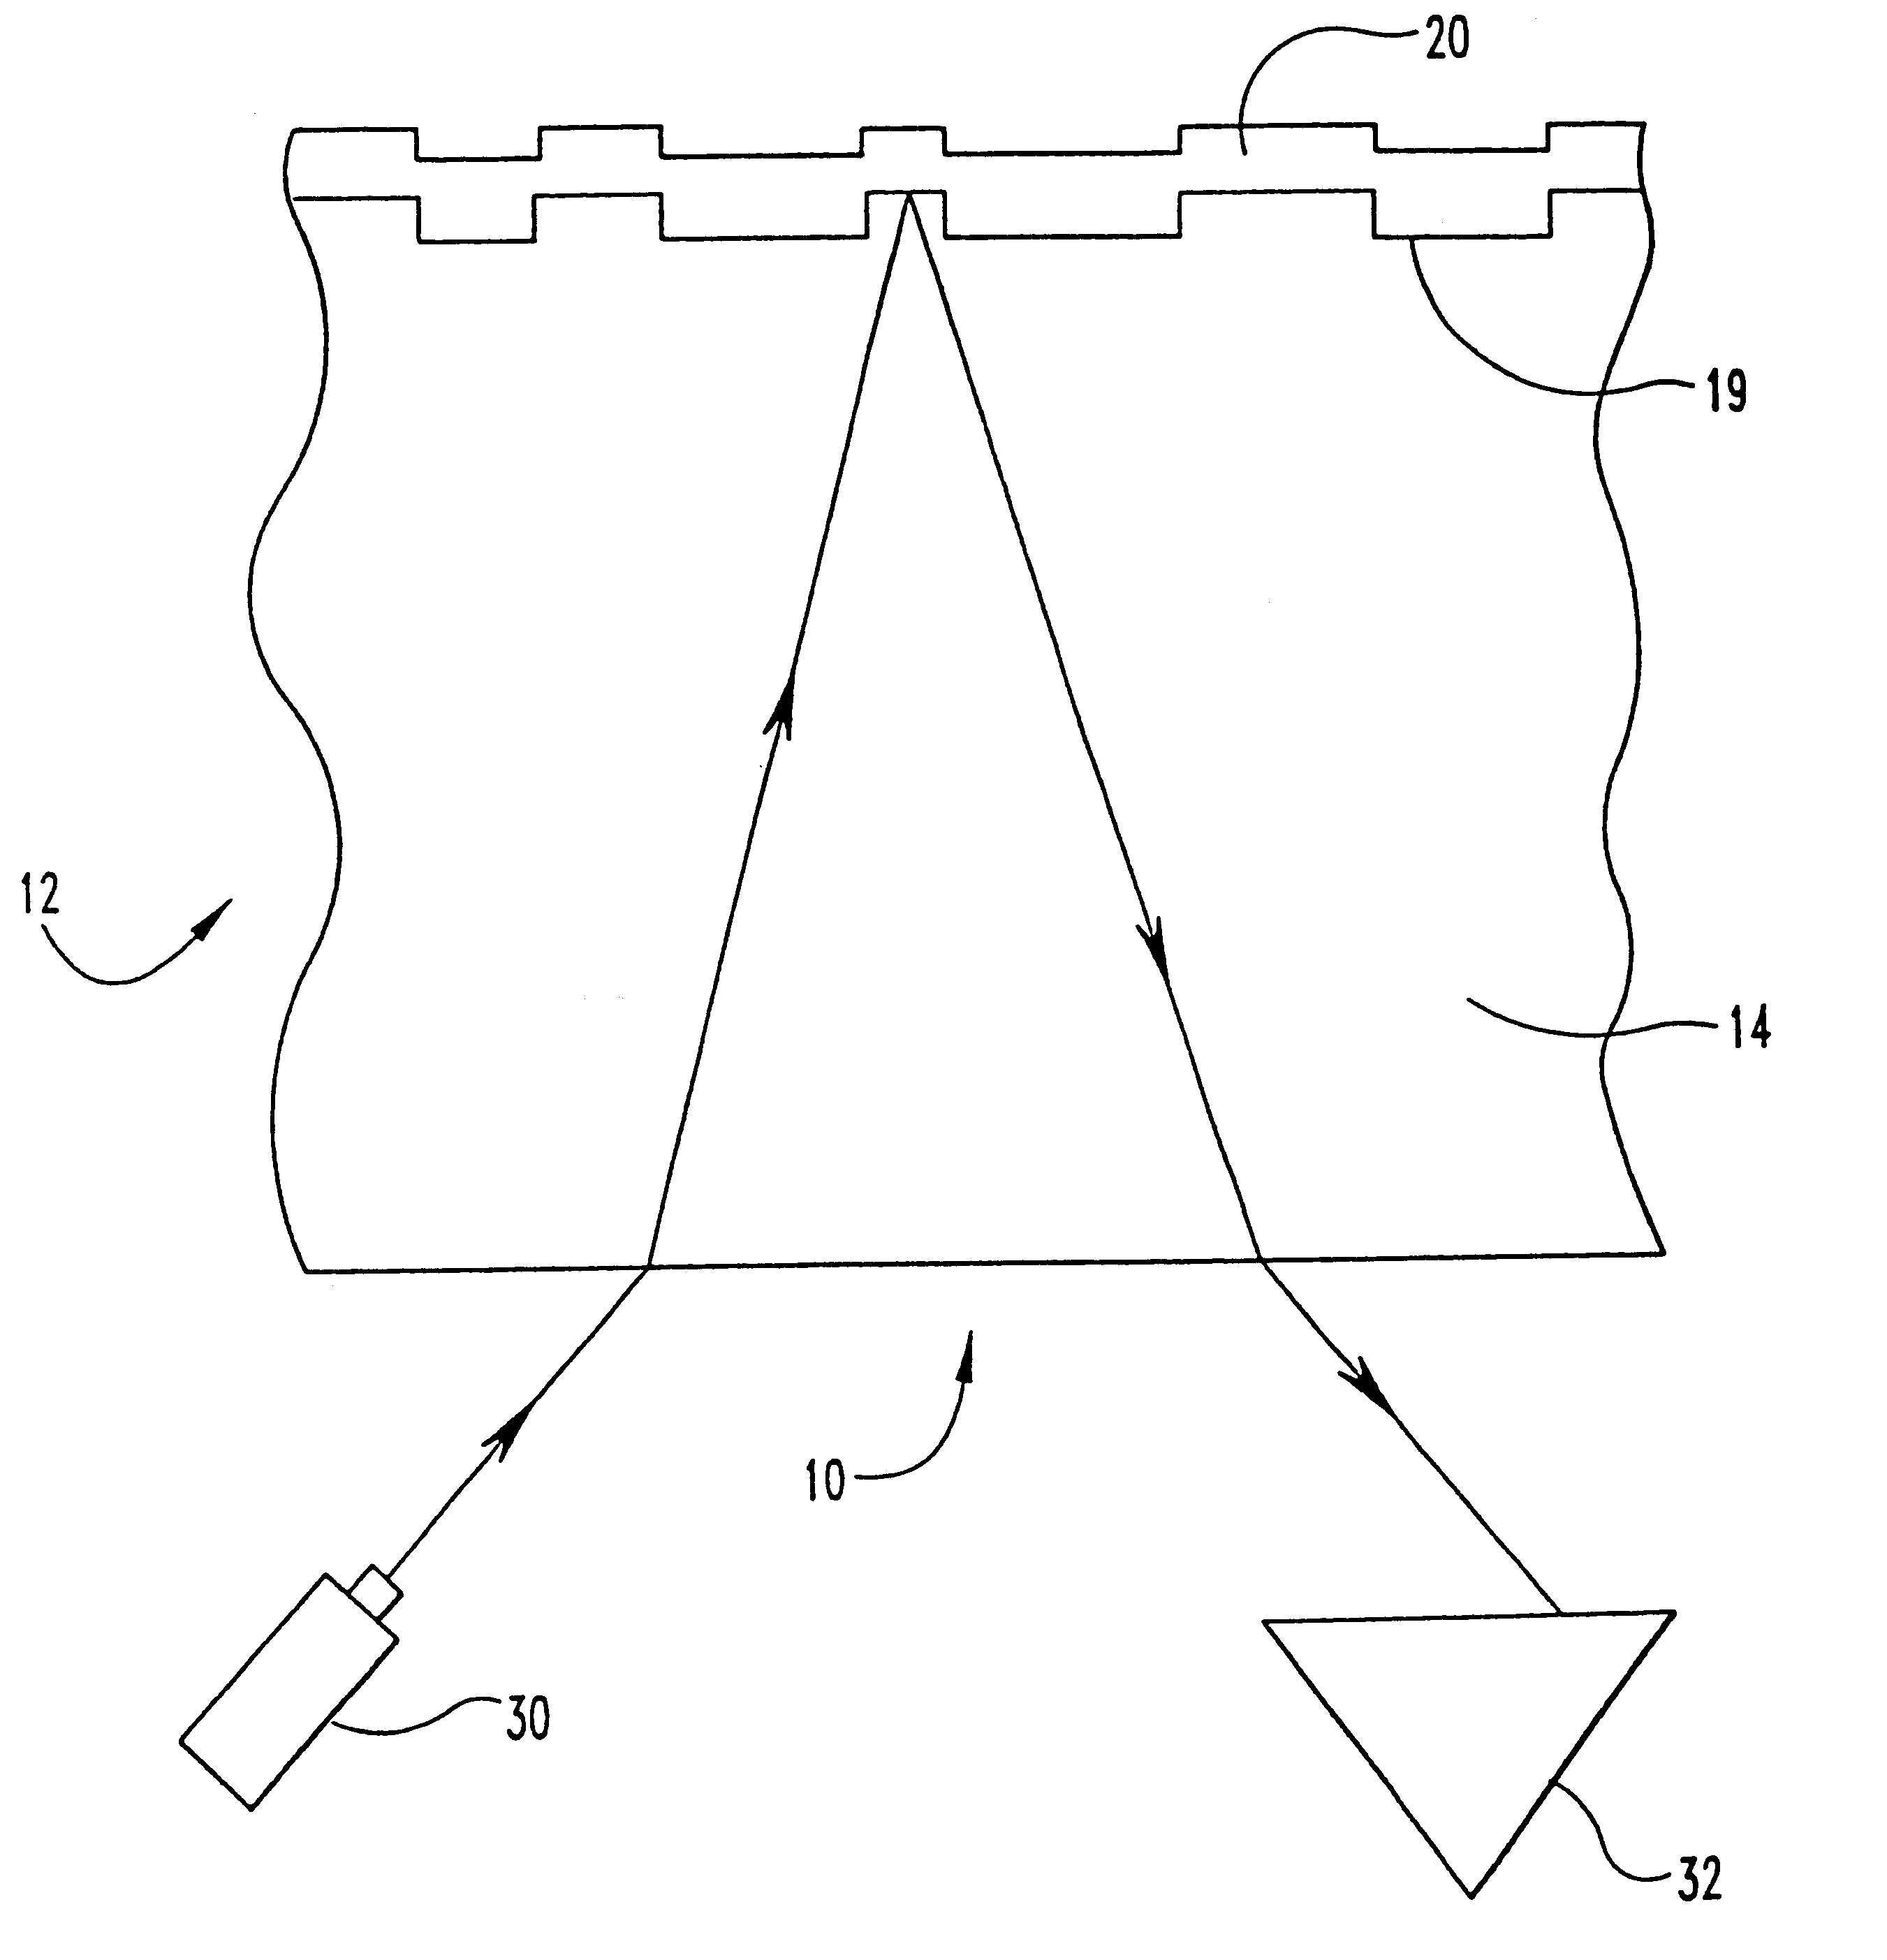 Metal alloys for the reflective or the semi-reflective layer of an optical storage medium